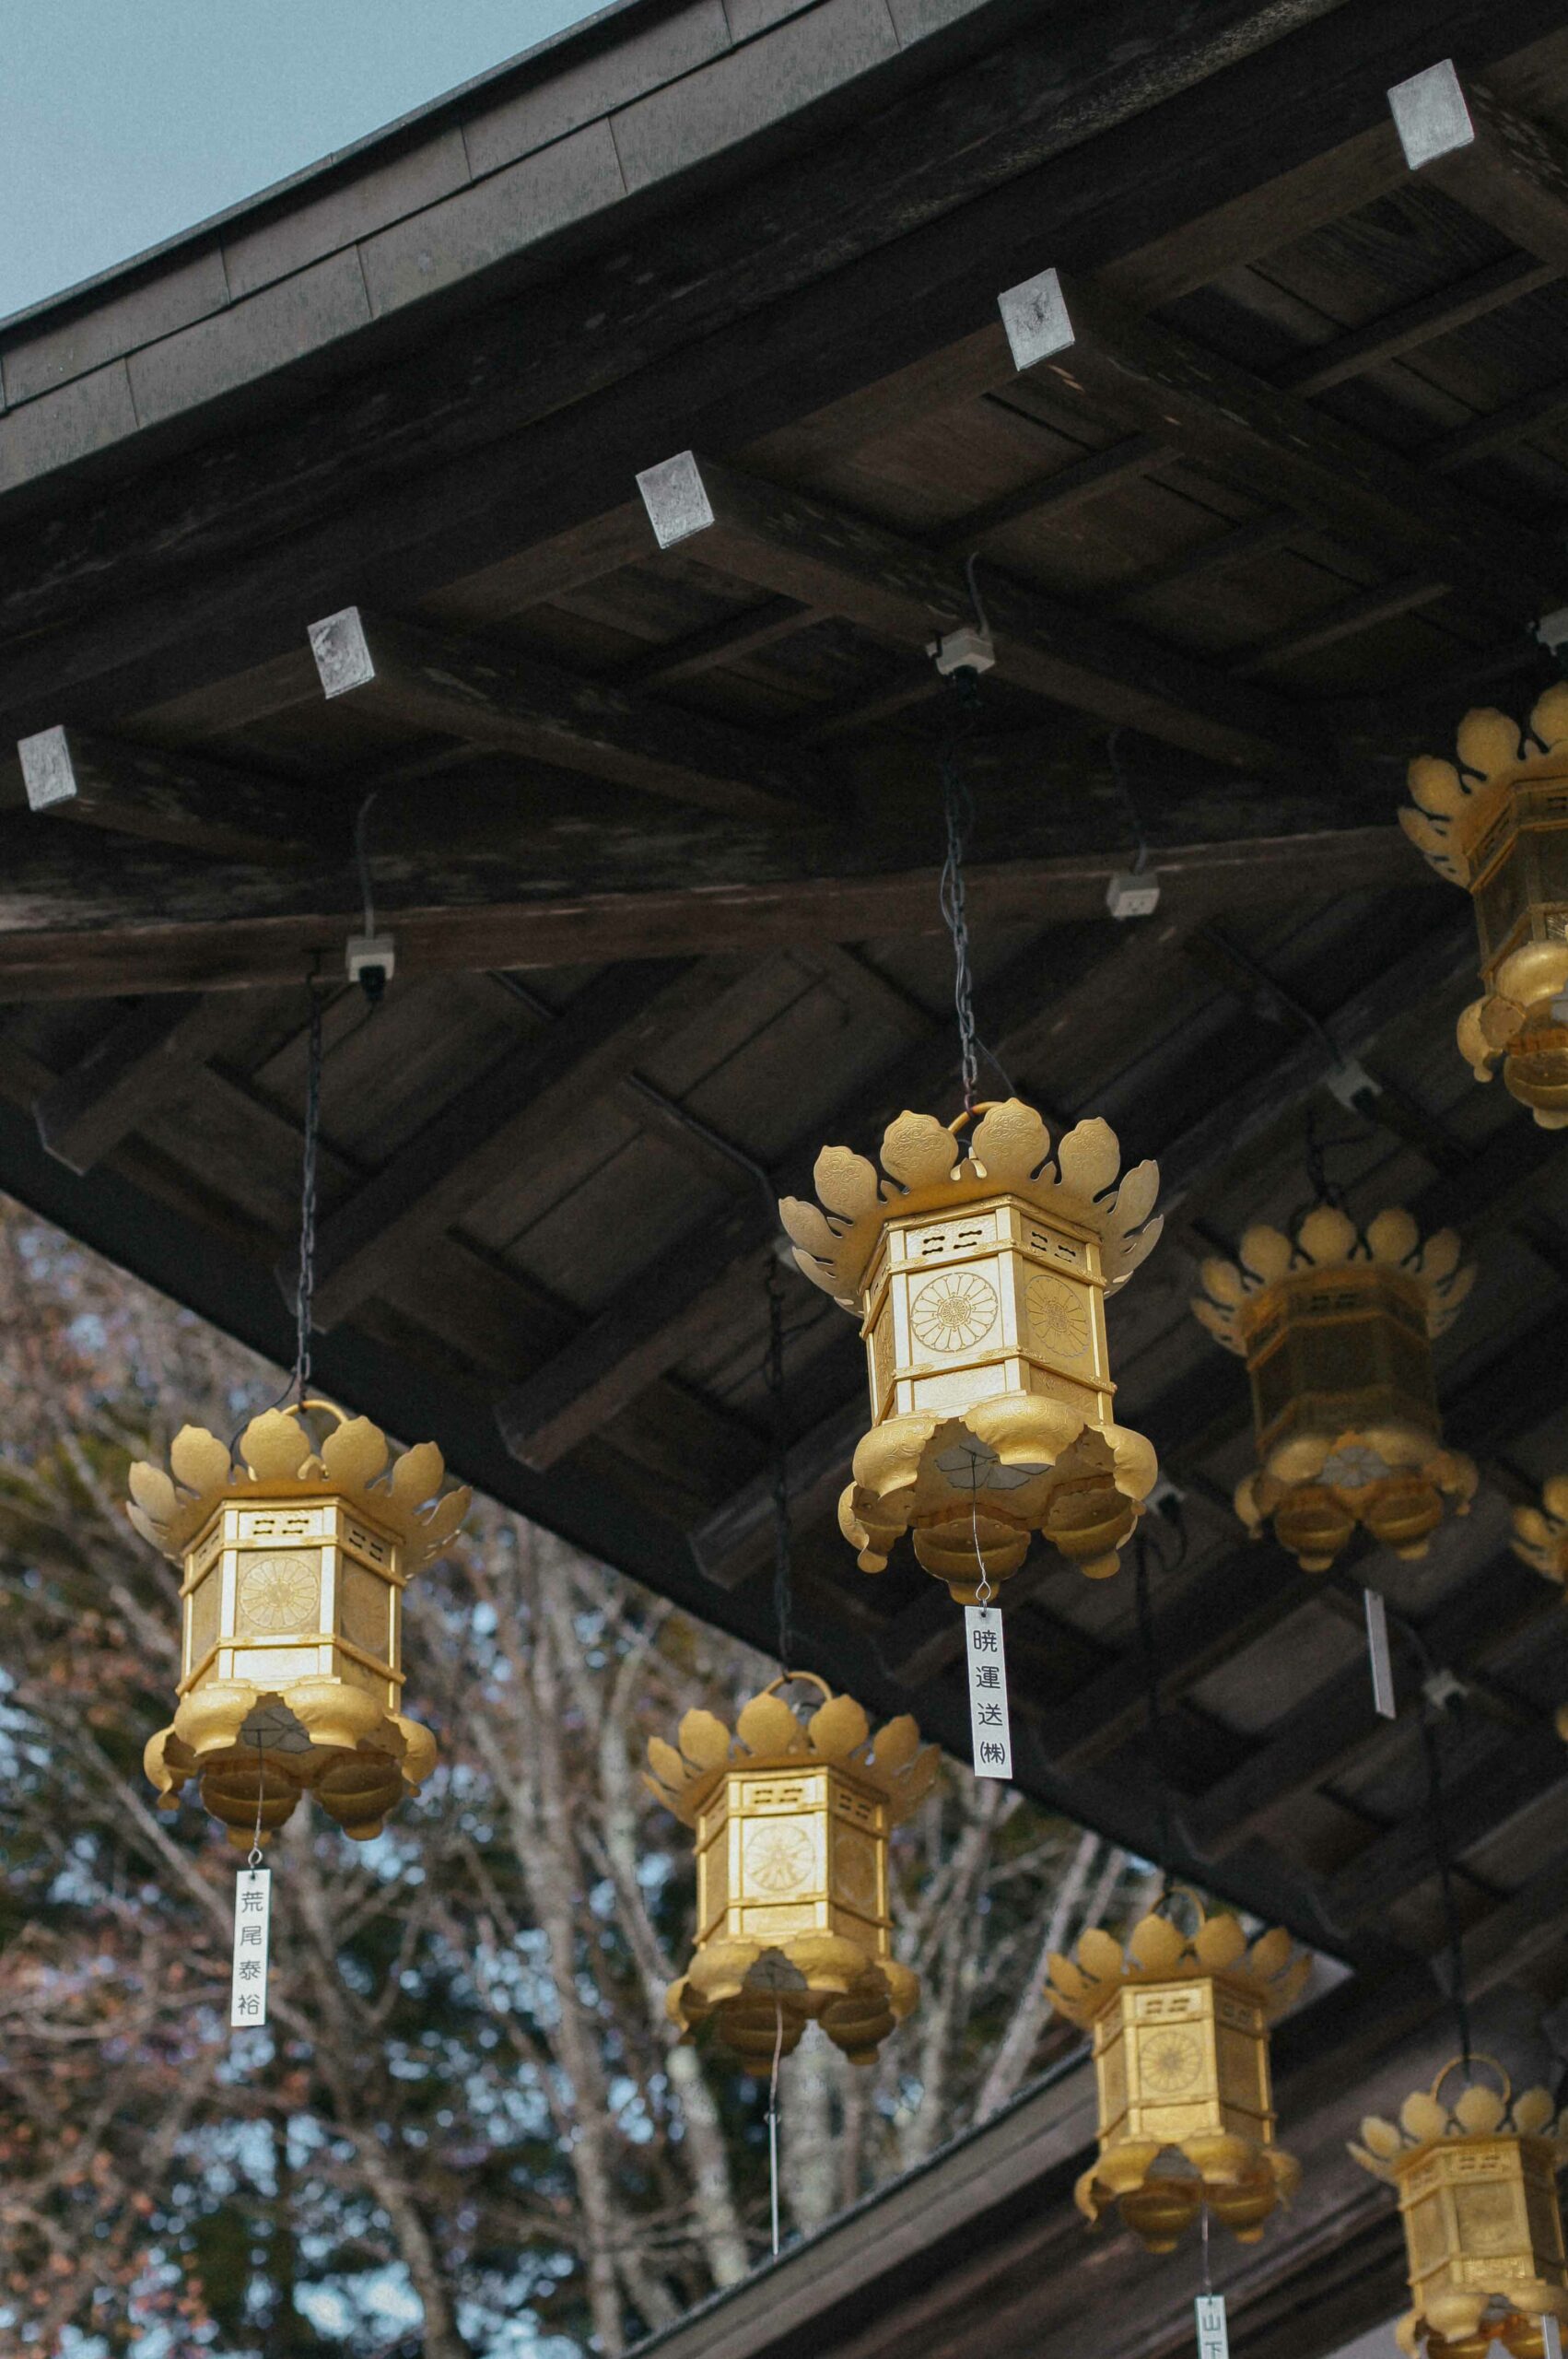 Shining golden lanterns hang from the temple's eaves.